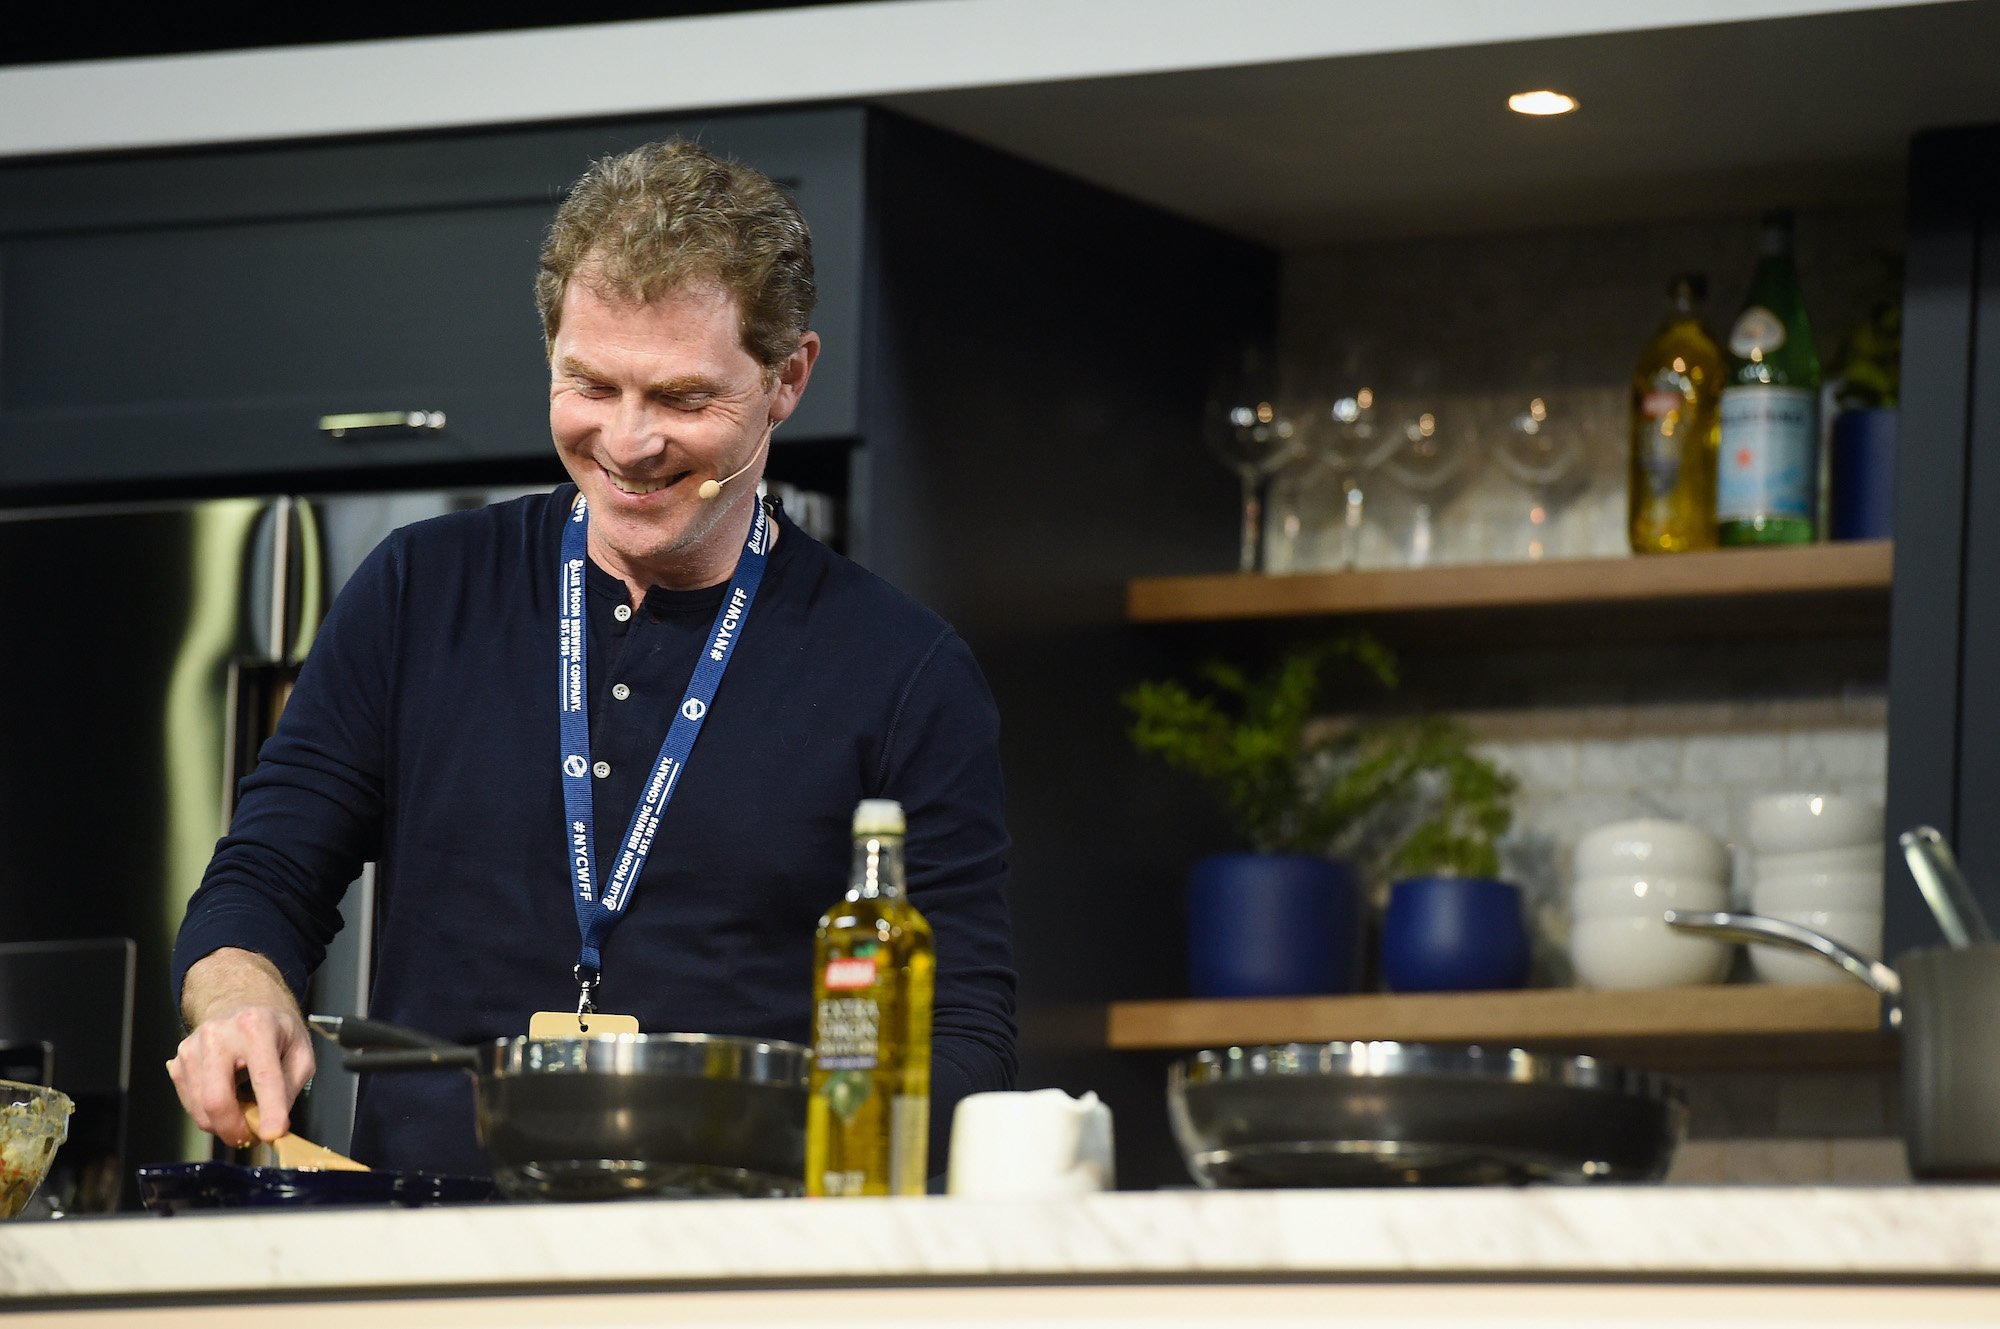 Is Bobby Flay the Most Popular Food Network Celebrity Chef?